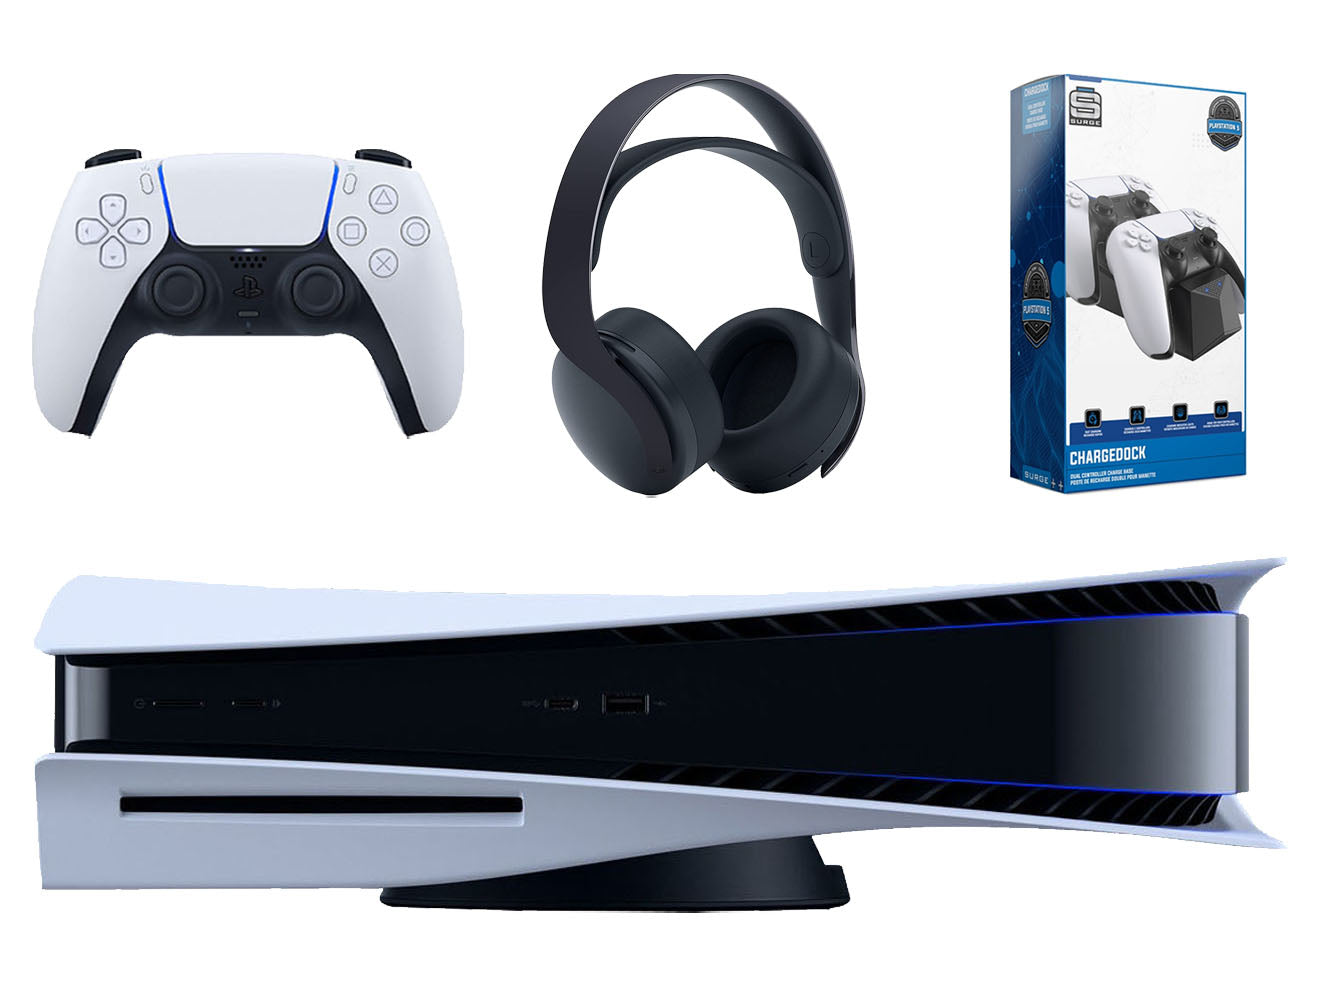 Sony Playstation 5 Disc Version Console with Black PULSE 3D Wireless Gaming Headset and Surge Dual Controller Charge Dock - Pro-Distributing